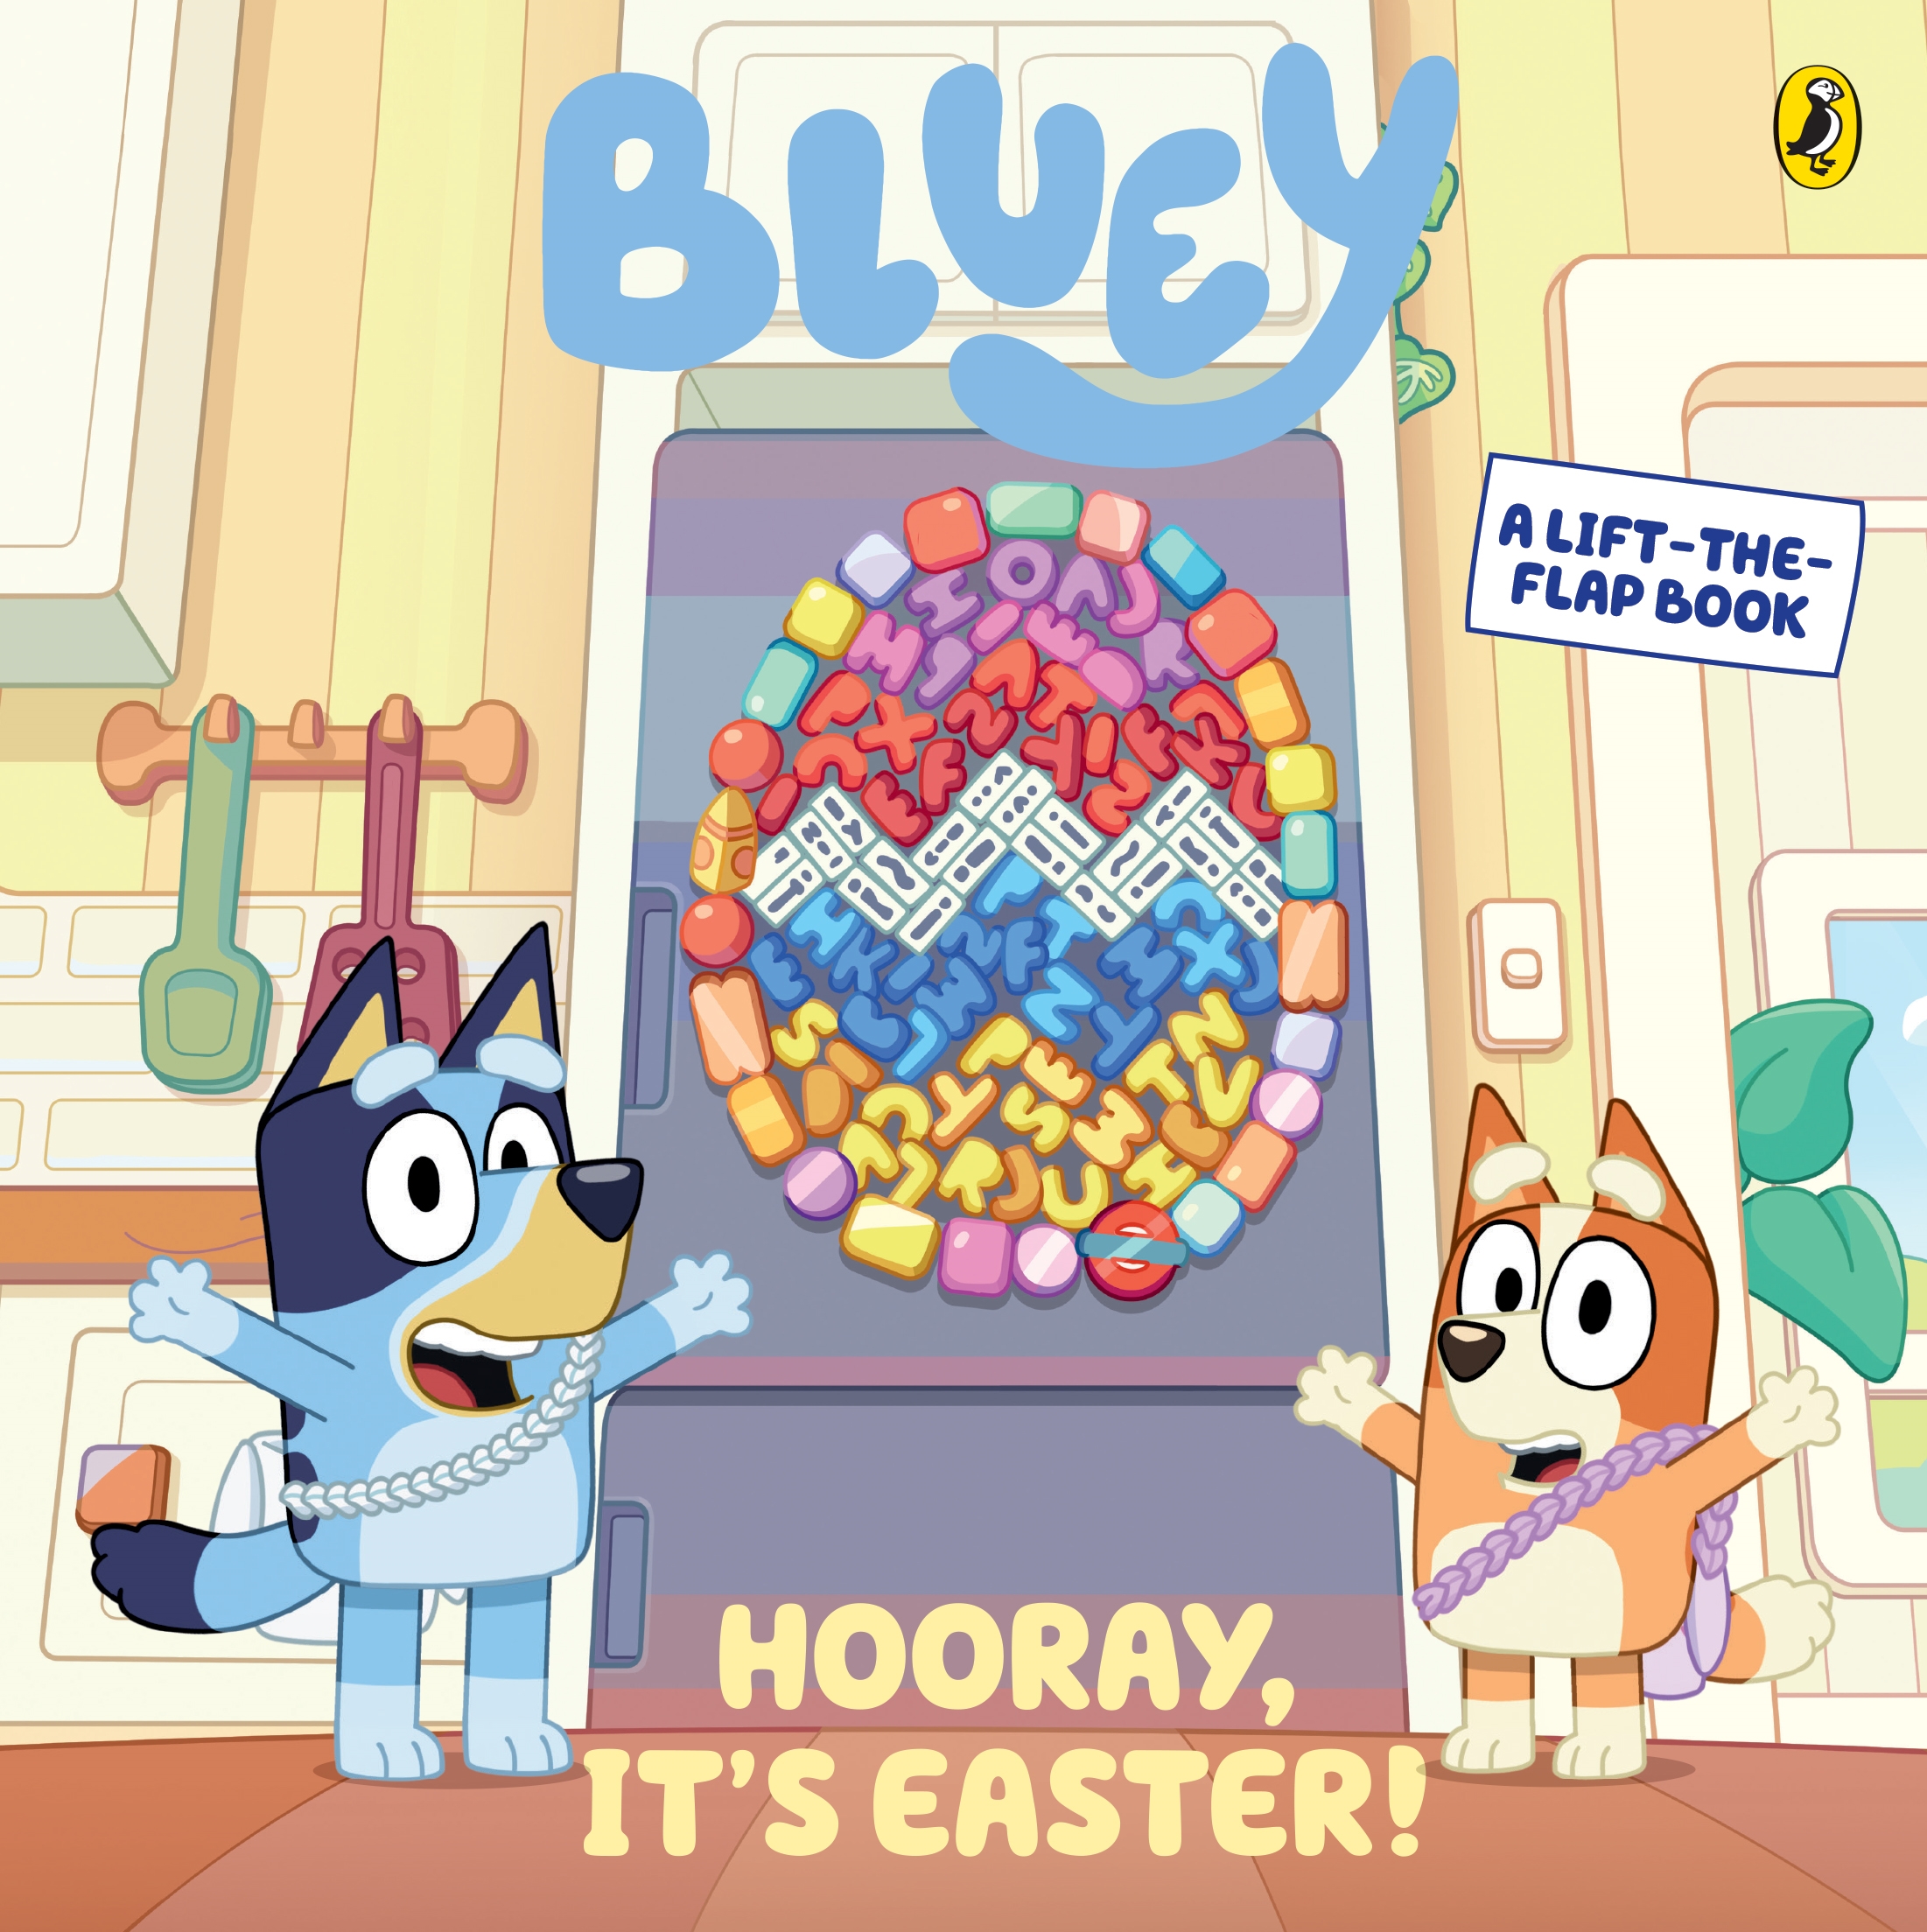 Bluey: A Jigsaw Puzzle Book - Bluey Official Website